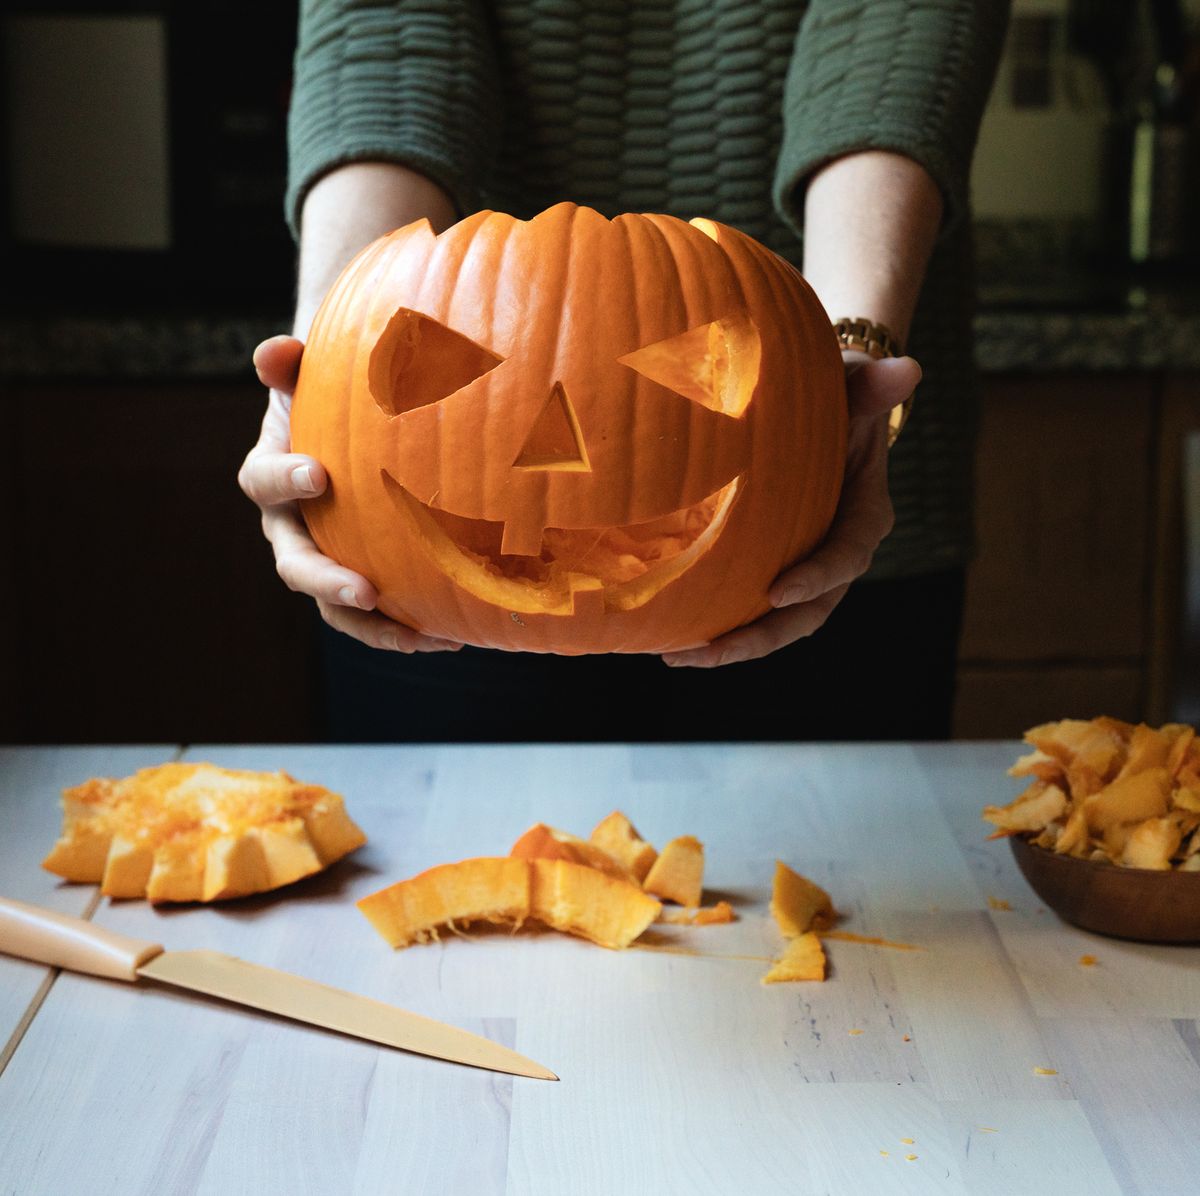 How to Carve a Pumpkin for Halloween - Pumpkin Carving Tips